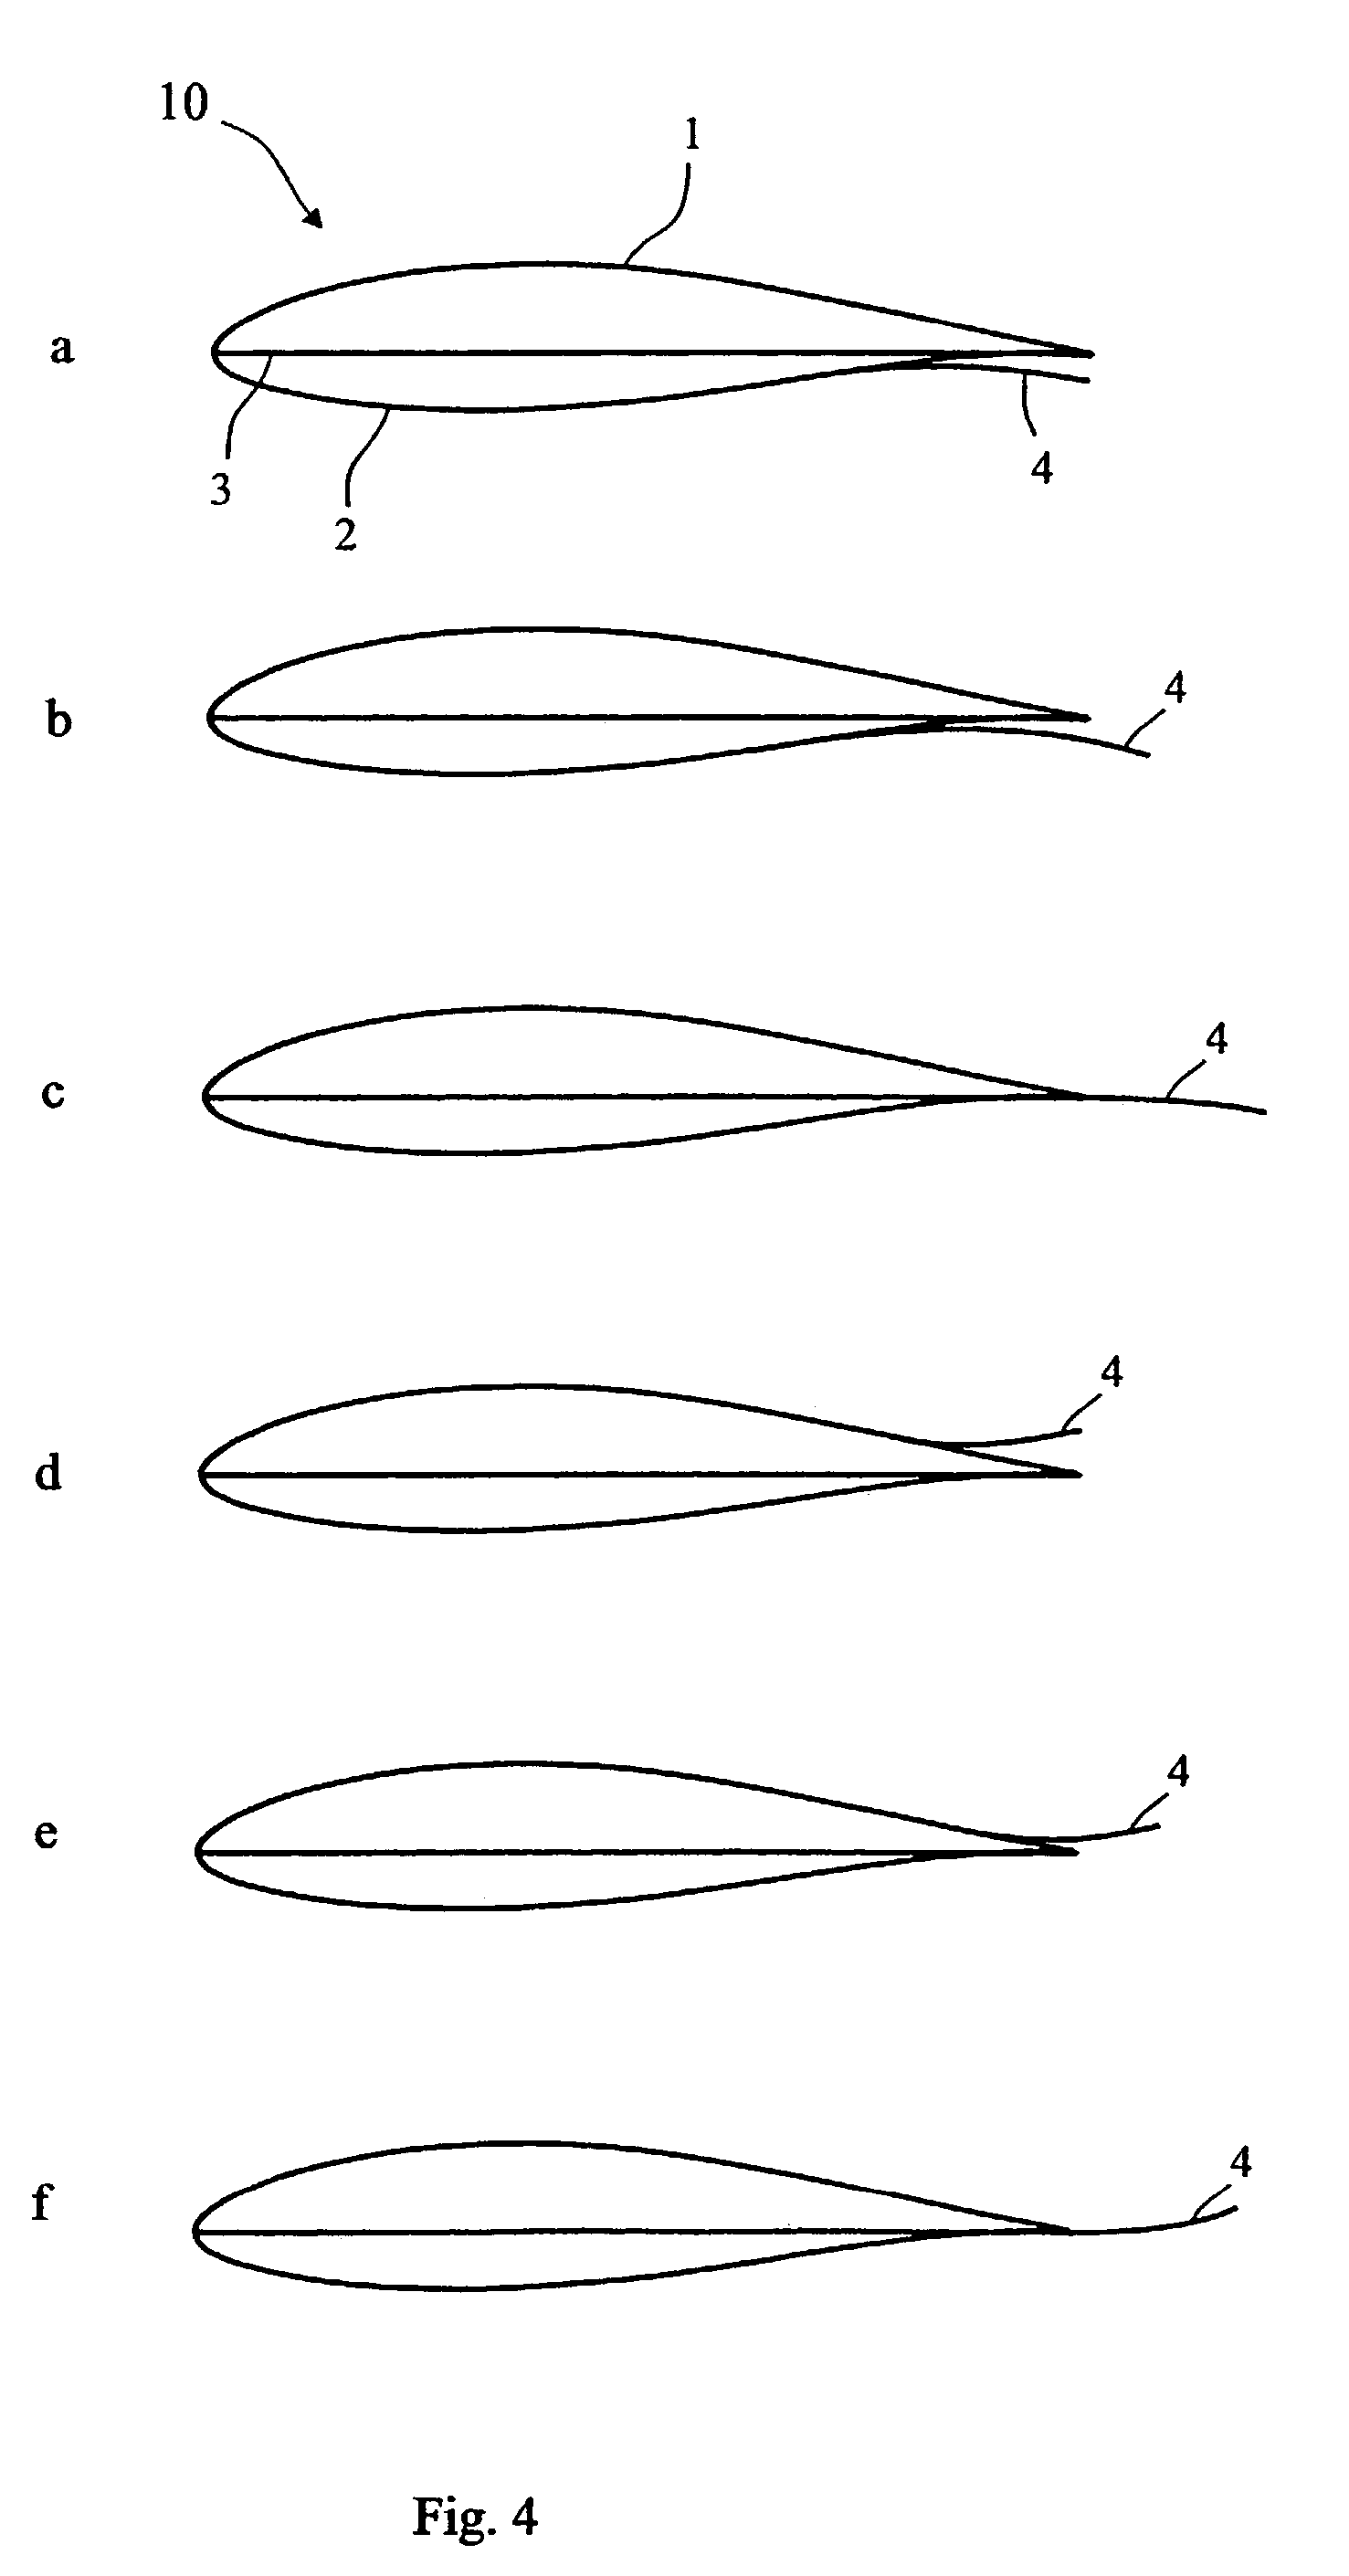 Wind turbine rotor blade comprising one or more means secured to the blade for changing the profile thereof depending on the atmospheric temperature